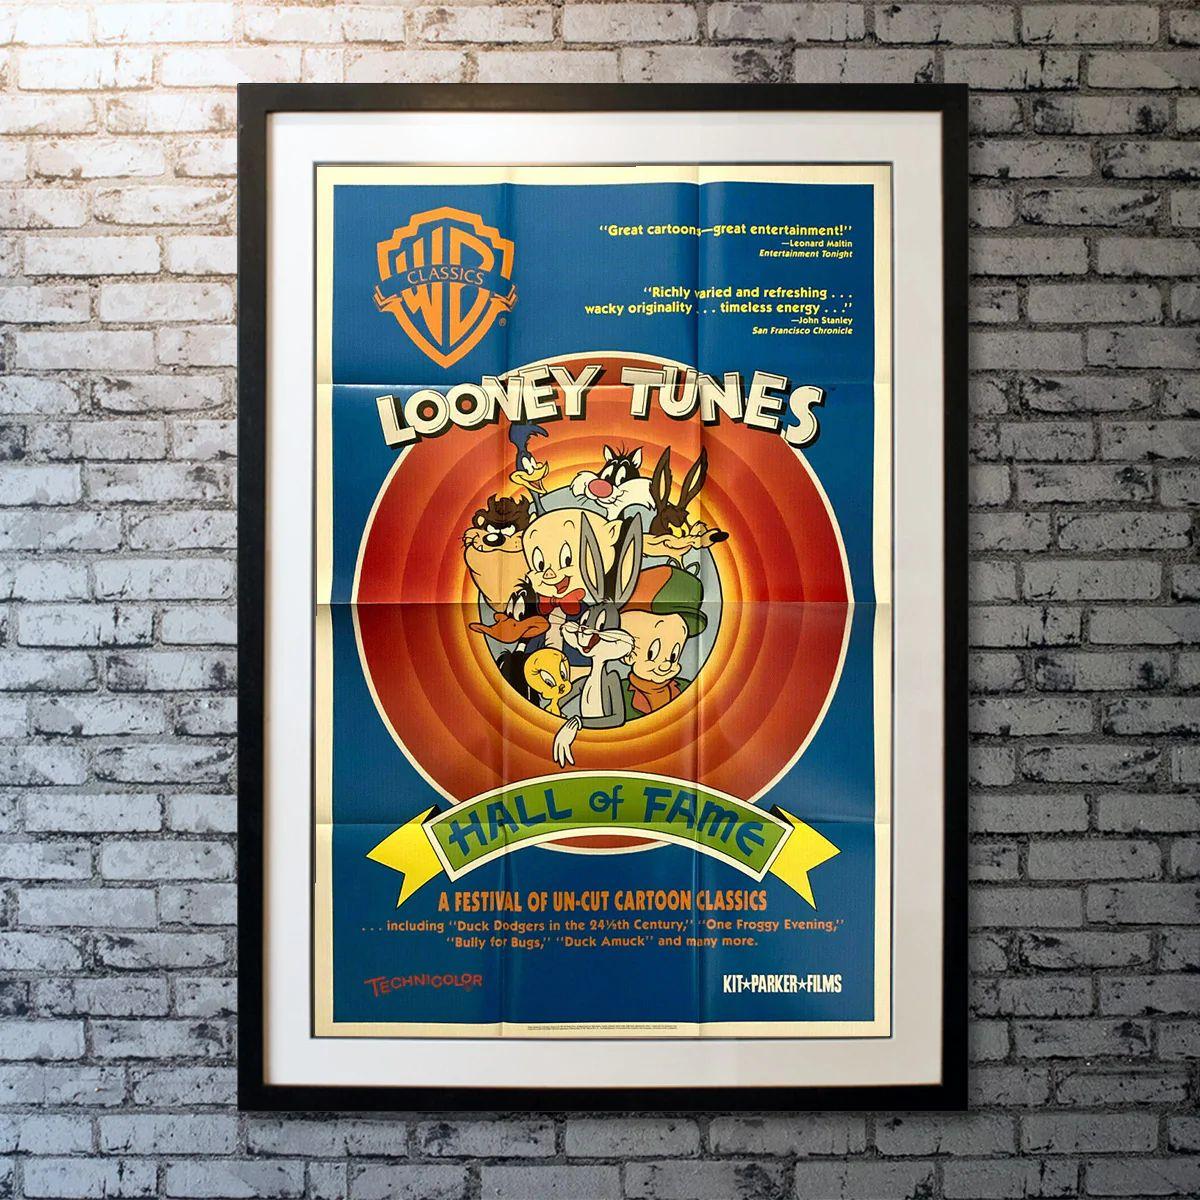 Looney Tunes Hall of Fame, Unframed Poster, 1991

Original One Sheet (27 X 40 Inches). Poster for a collection of 15 classic Warner Bros. cartoons.

Year: 1991
Nationality: United States
Condition: Unfolded
Type: Original One Sheet
Size: 27 X 40